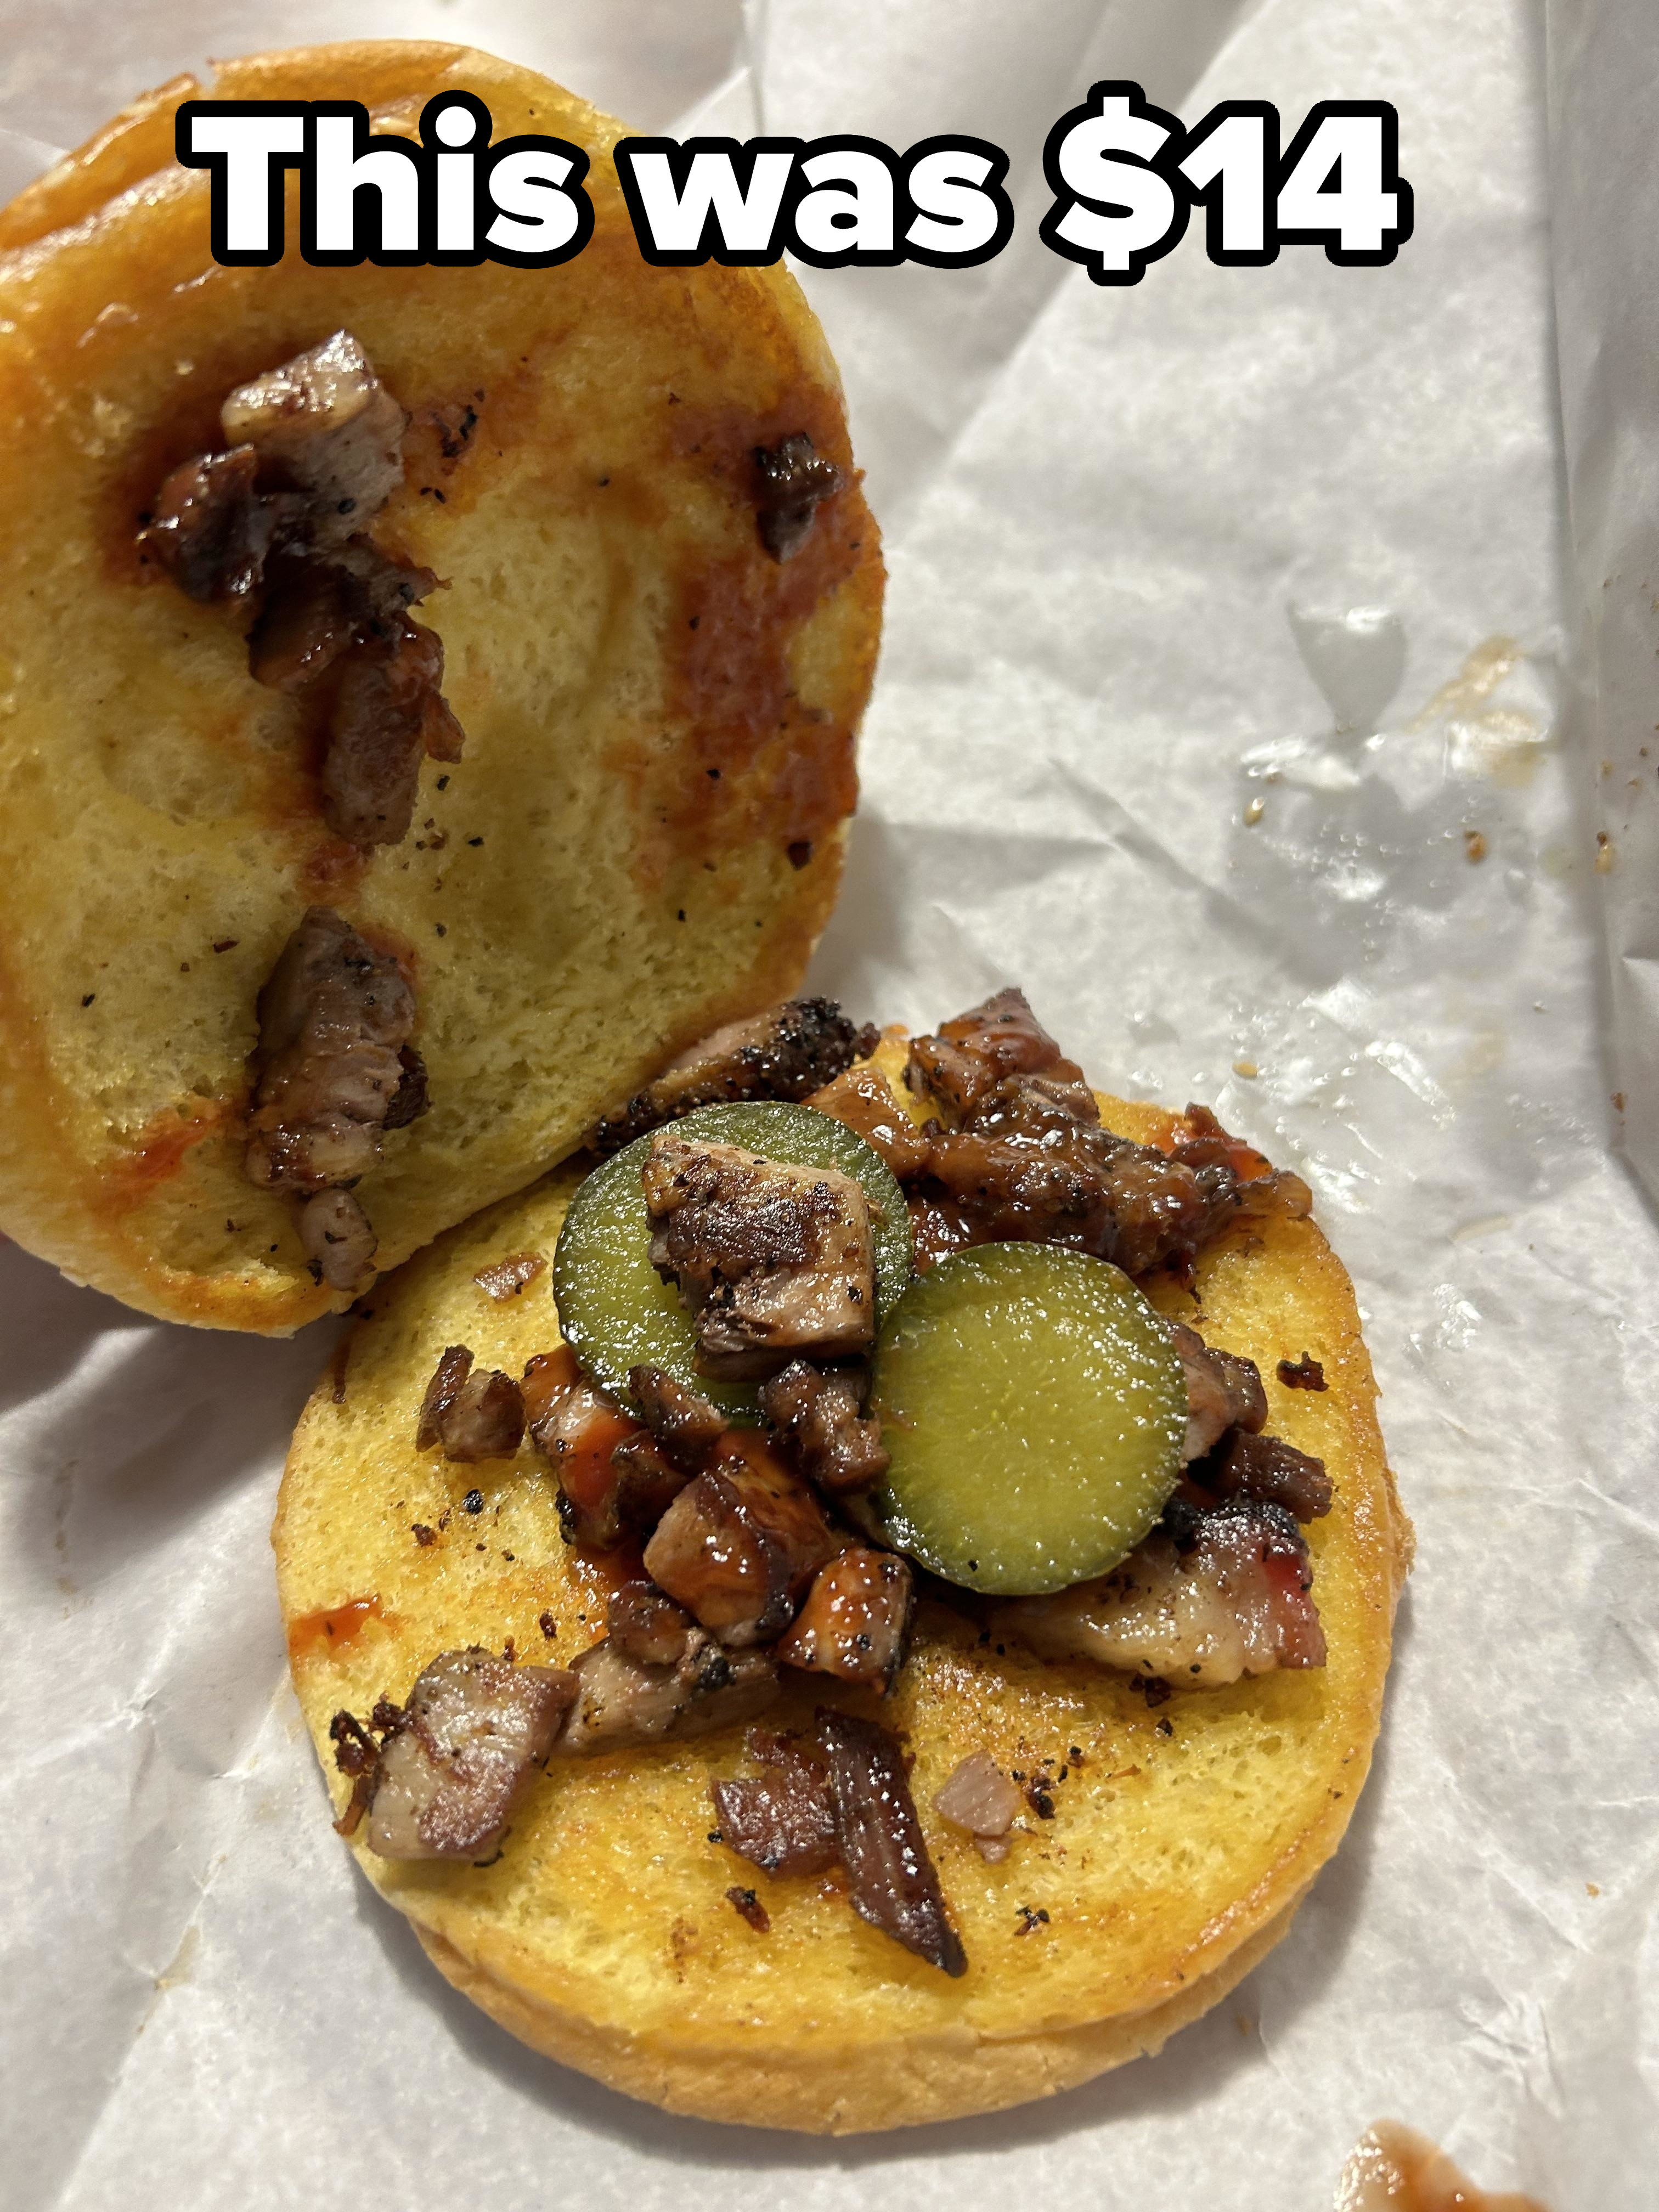 A $14 sandwich that consists of a bun, scant small pieces of meat, and two sad pickle slices